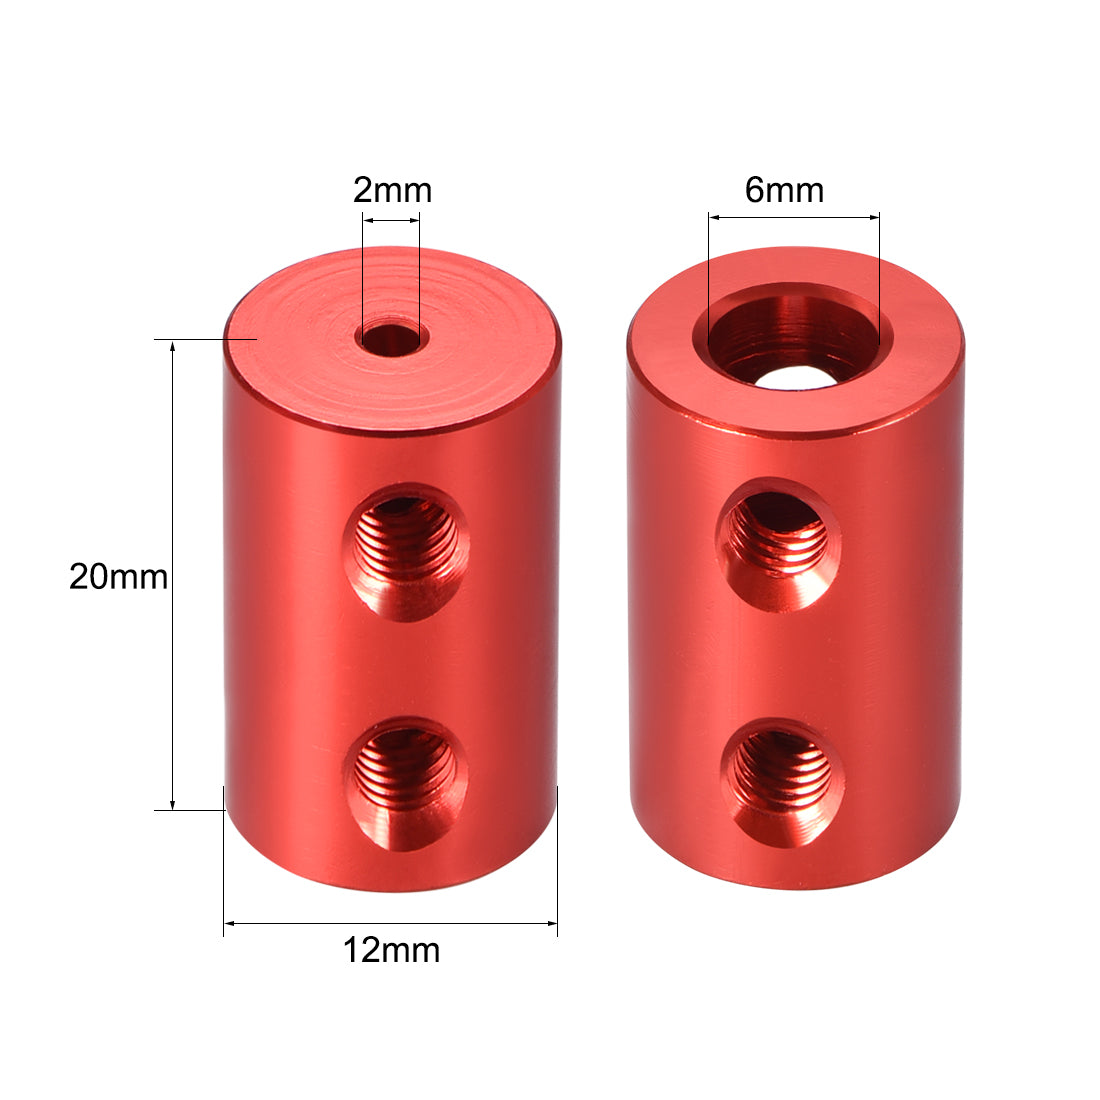 uxcell Uxcell Shaft Coupling 2mm to 6mm Bore L20xD12 Robot Motor Wheel Rigid Coupler Connector Red